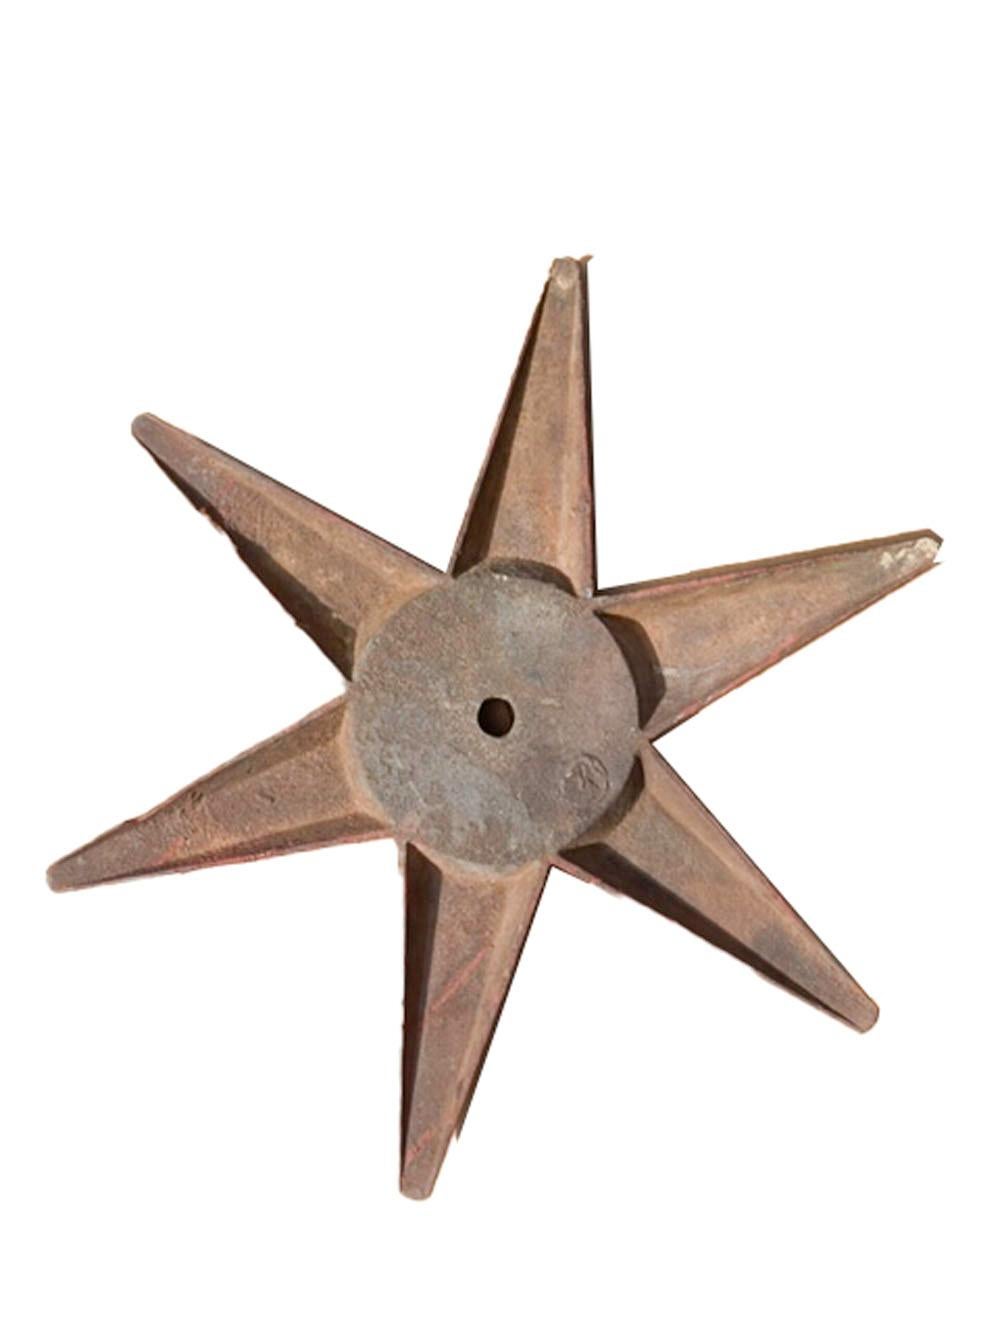 19th Century 28 Inch Cast Iron Building Anchor of 6 Pointed Star Form with Sunflower Center